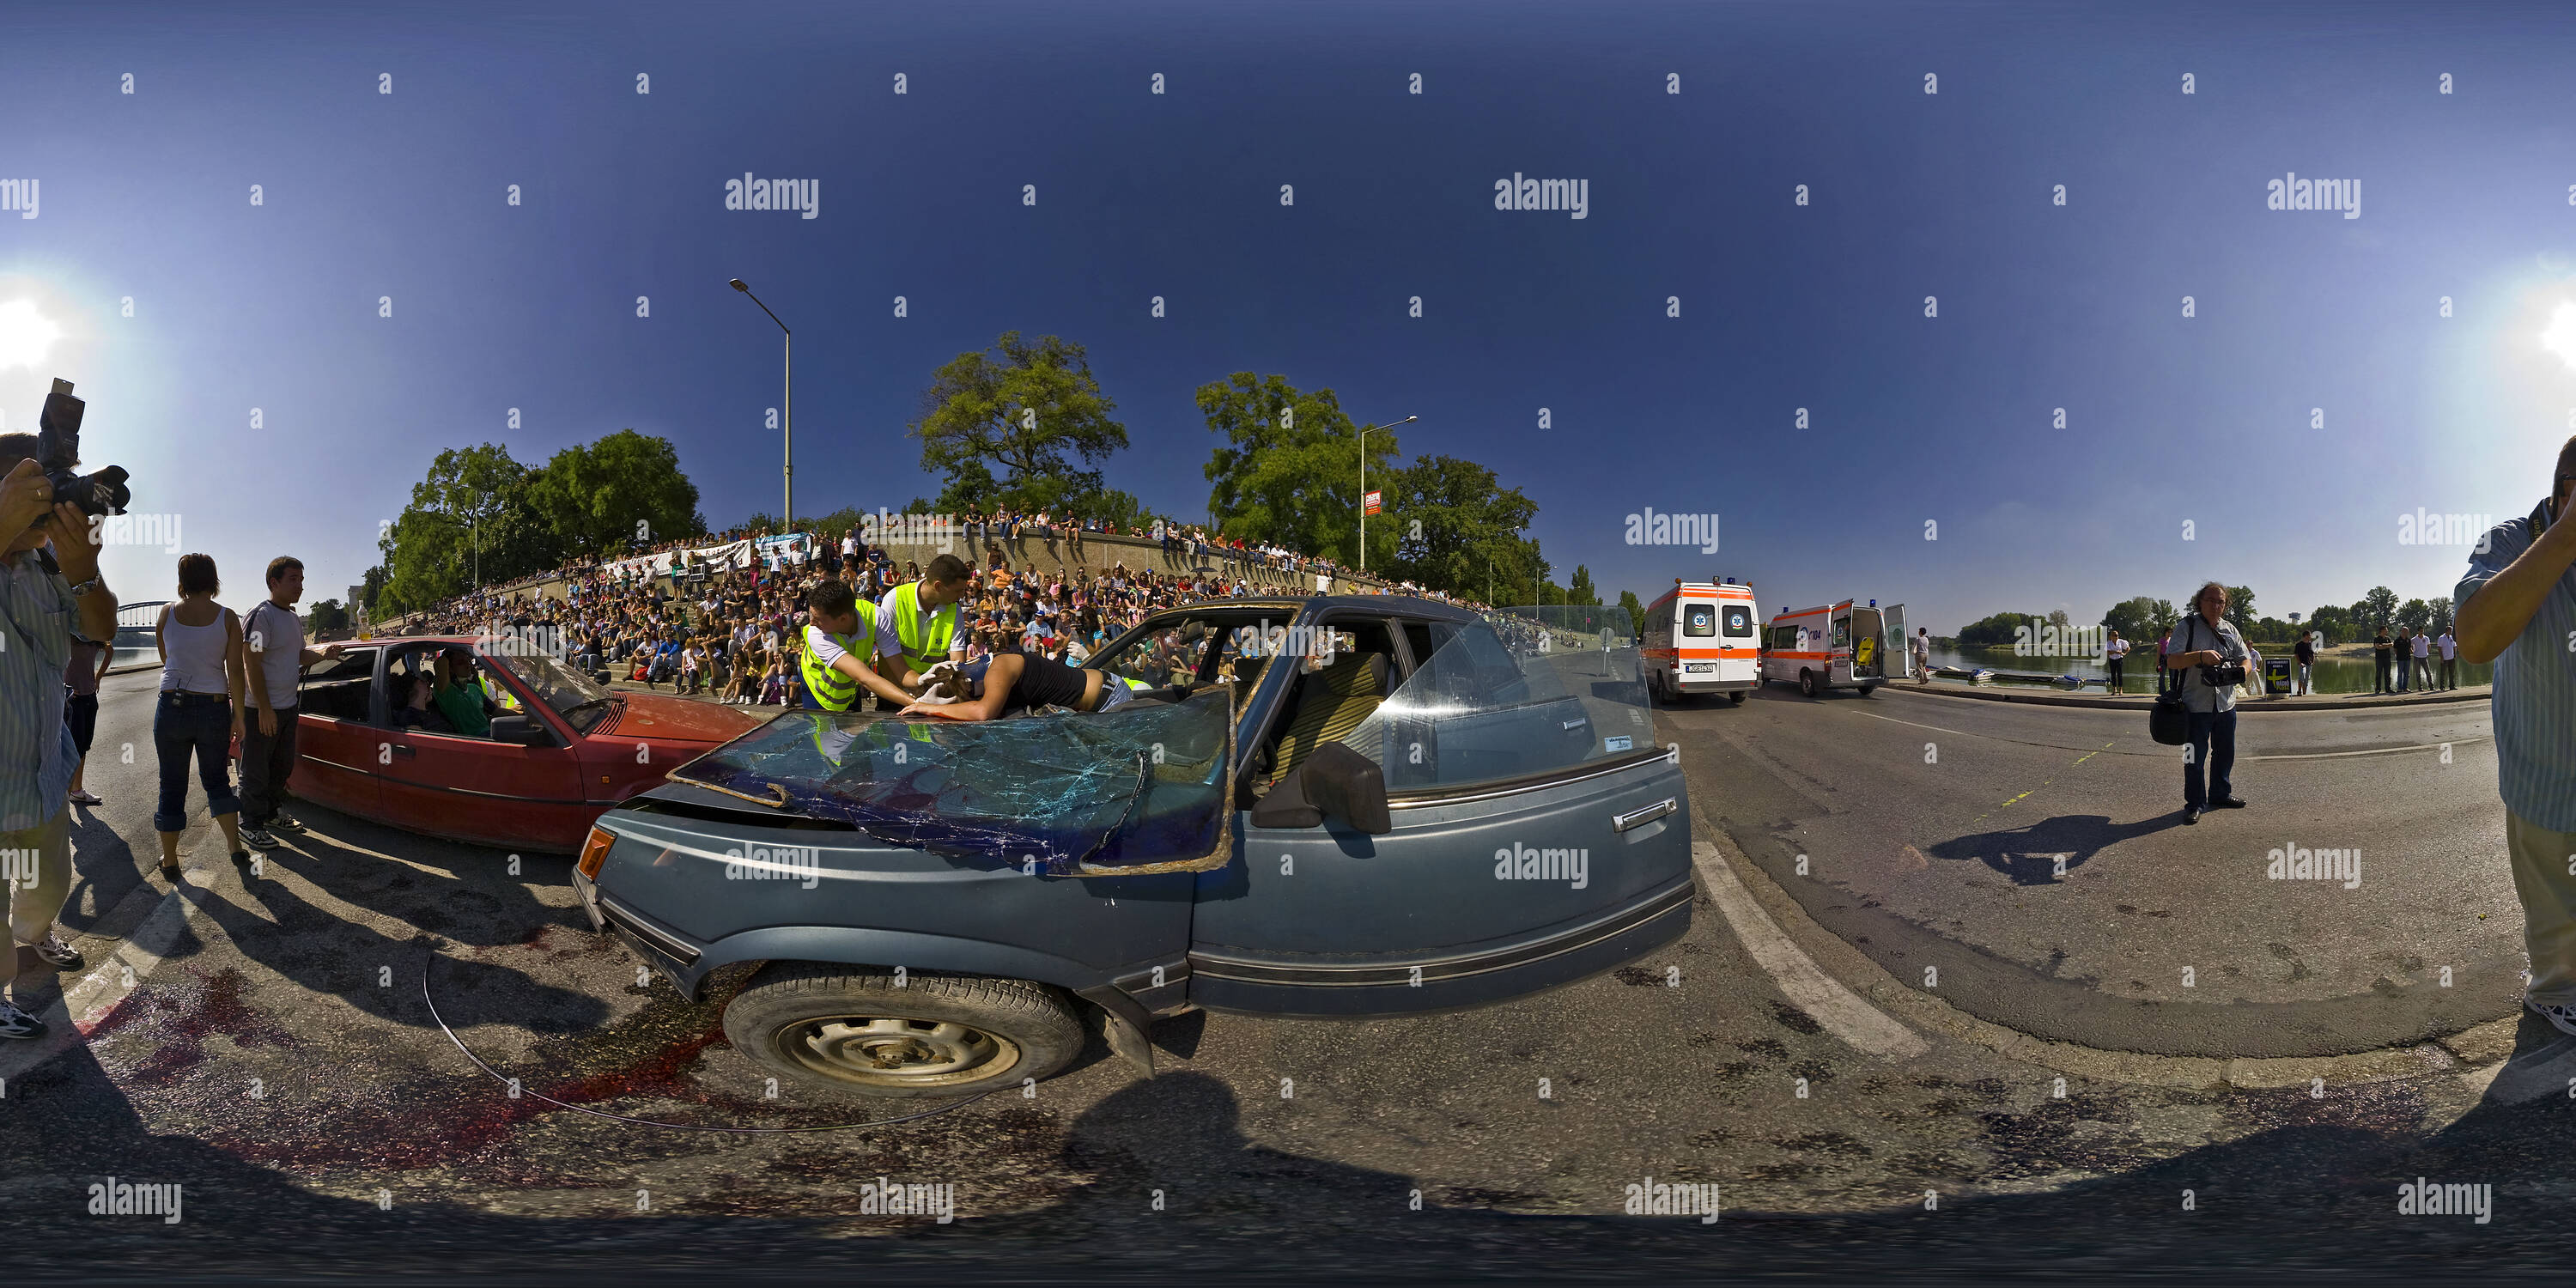 360 degree panoramic view of Traffic accident imitation exhibition - serious injured